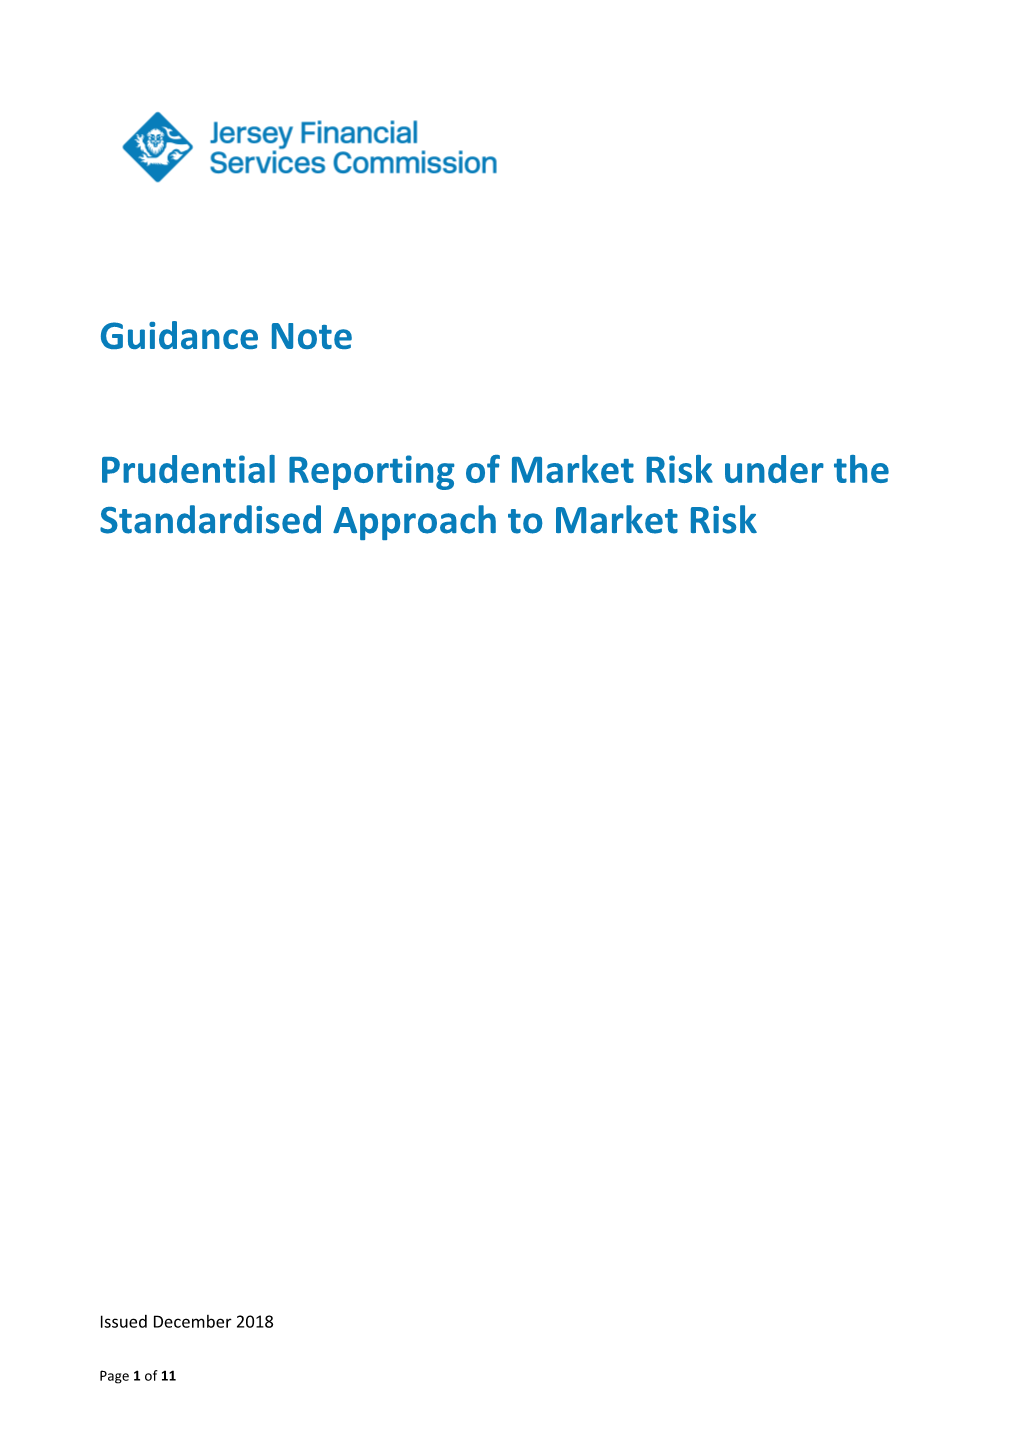 Guidance Note Prudential Reporting of Market Risk Under The